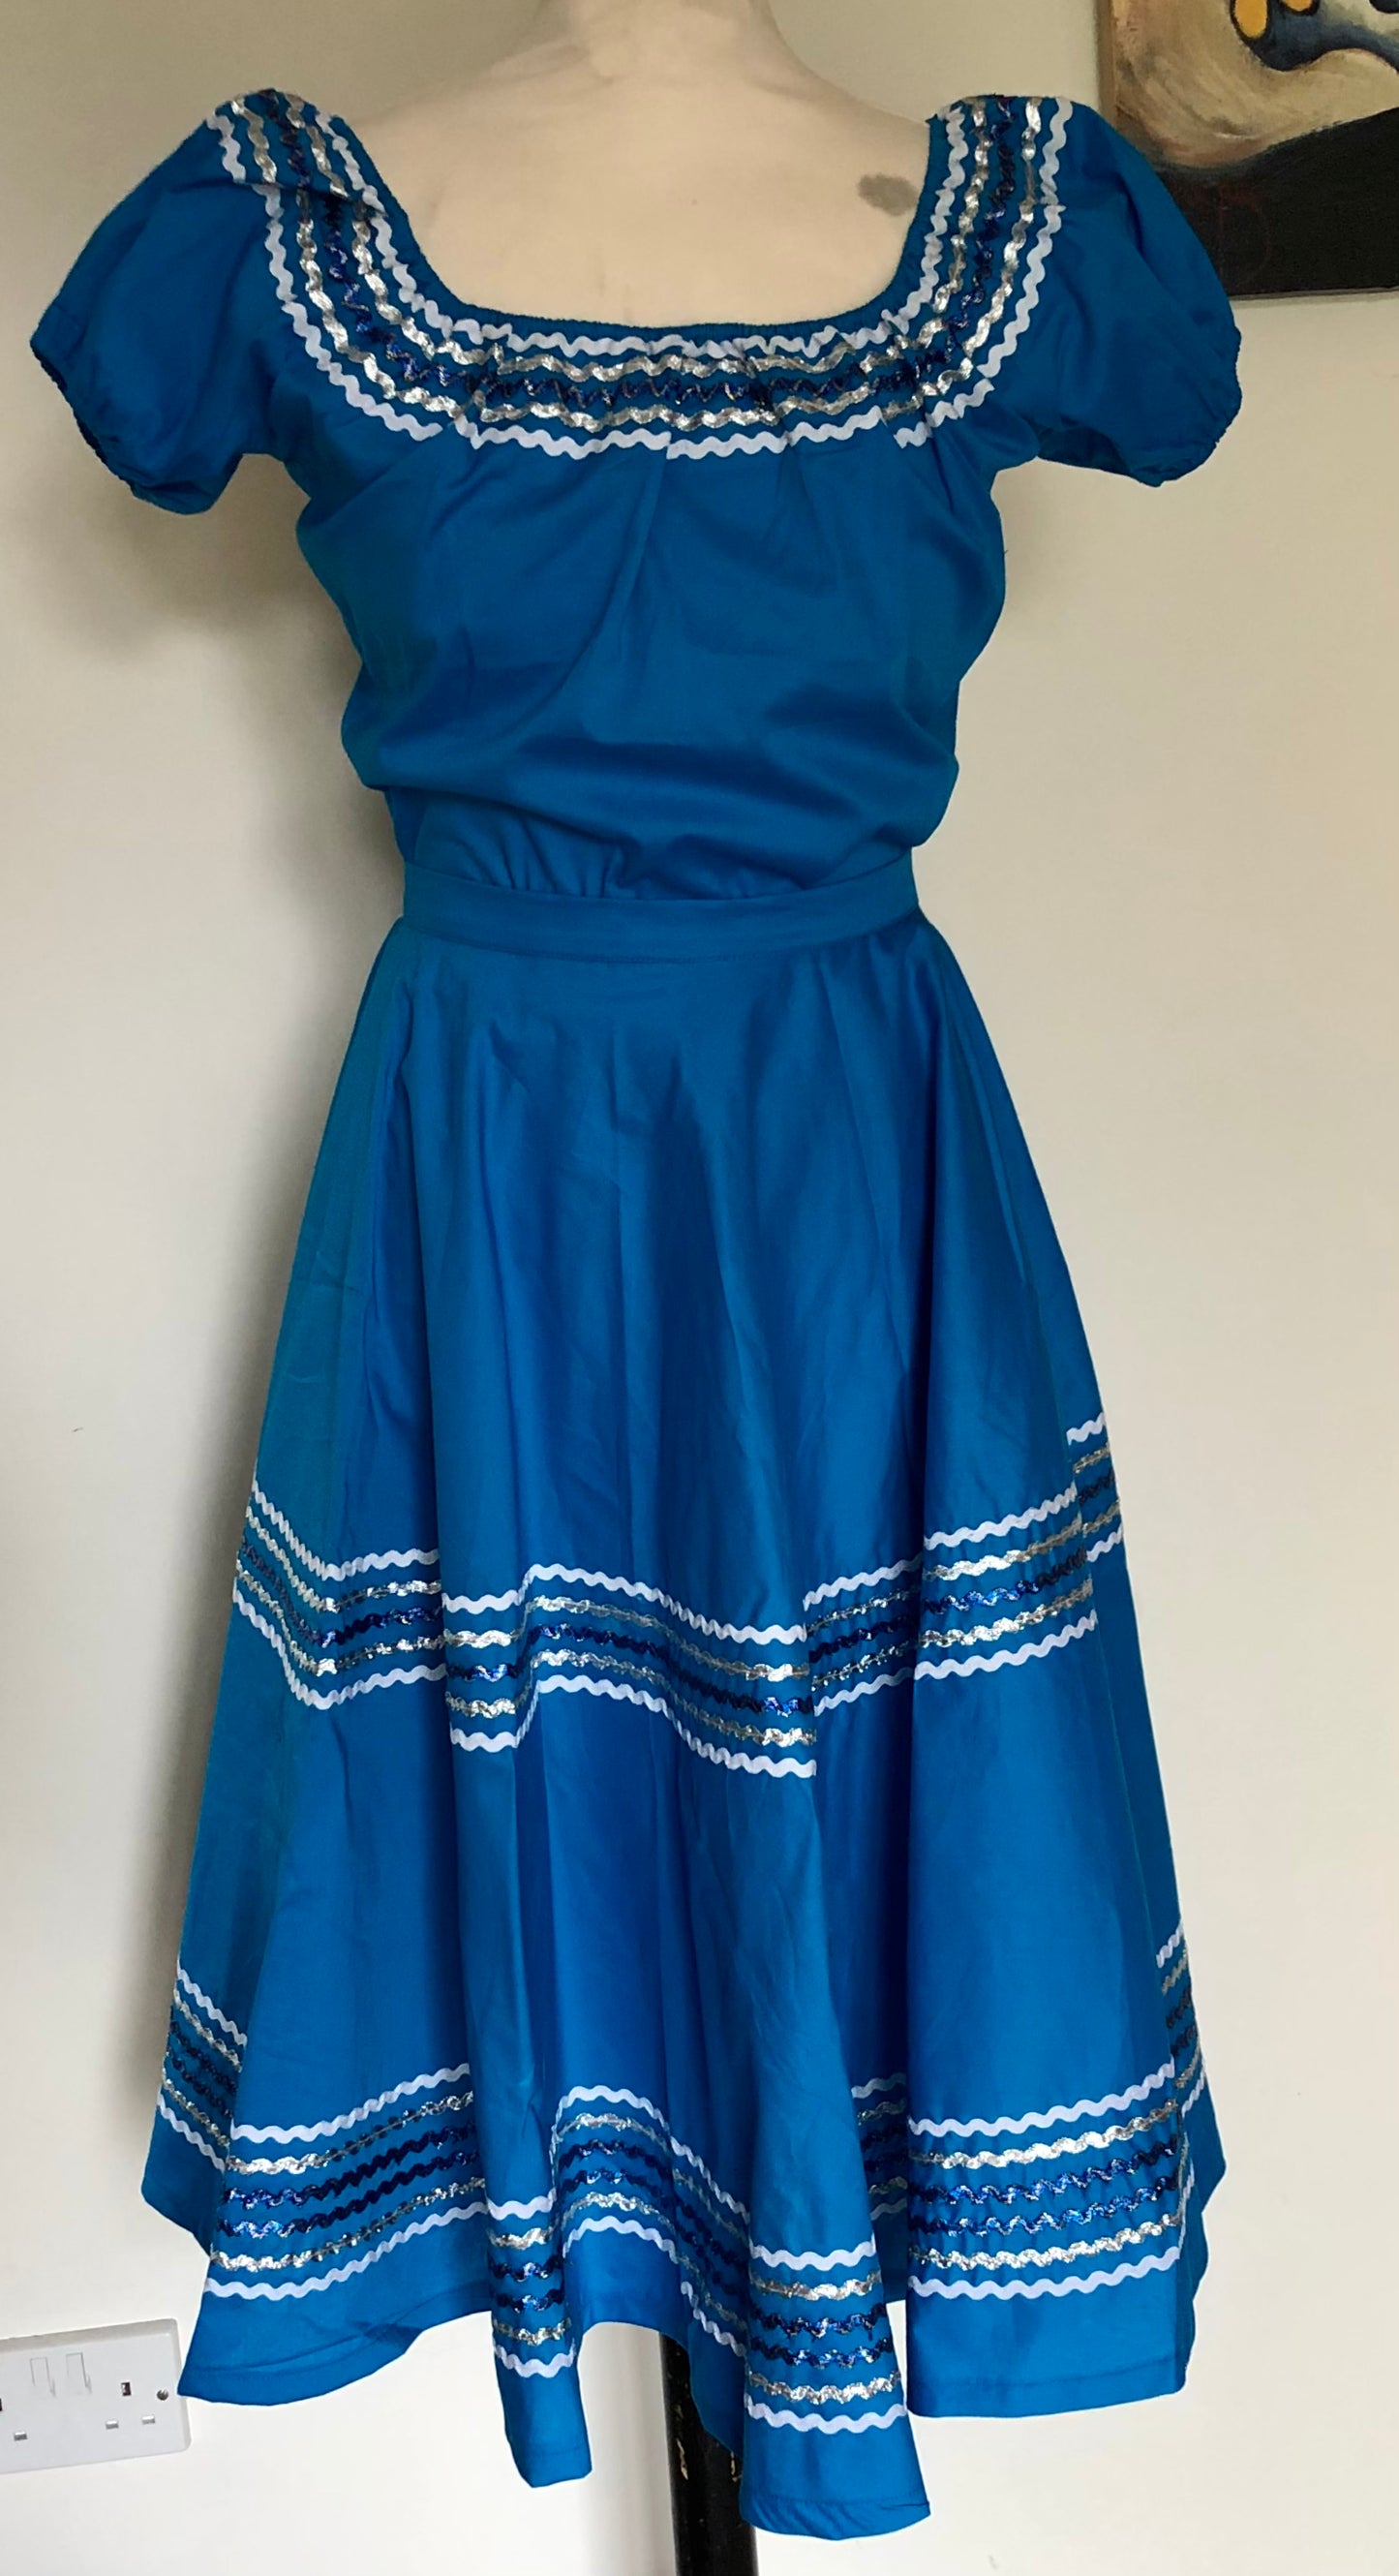 Blue Vintage 1950s style full circle Patio skirt XL